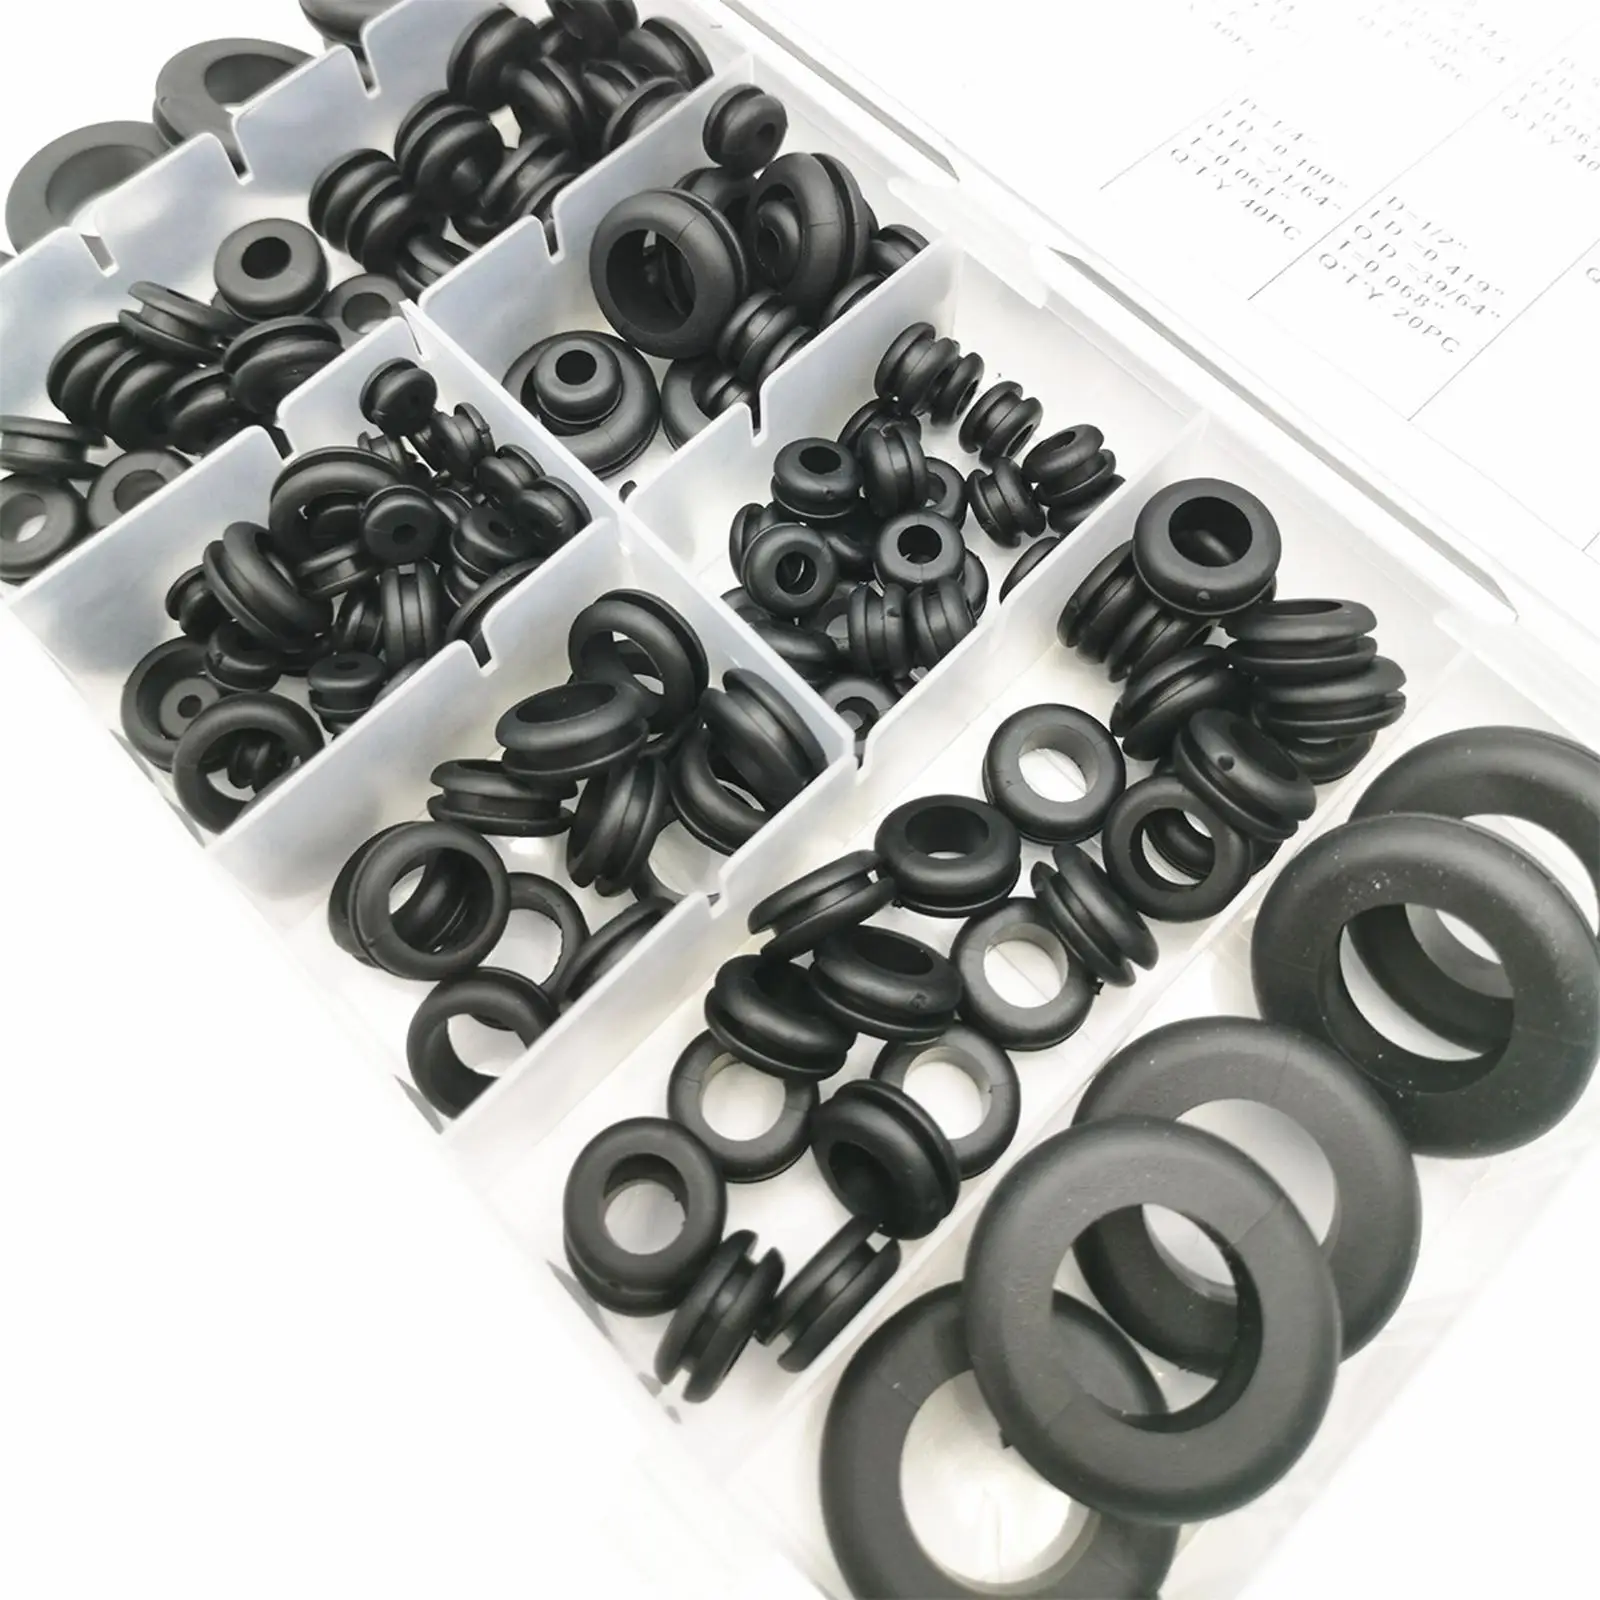 180 Pieces Rubber Grommets Assorted Sizes Grommets Accessories for